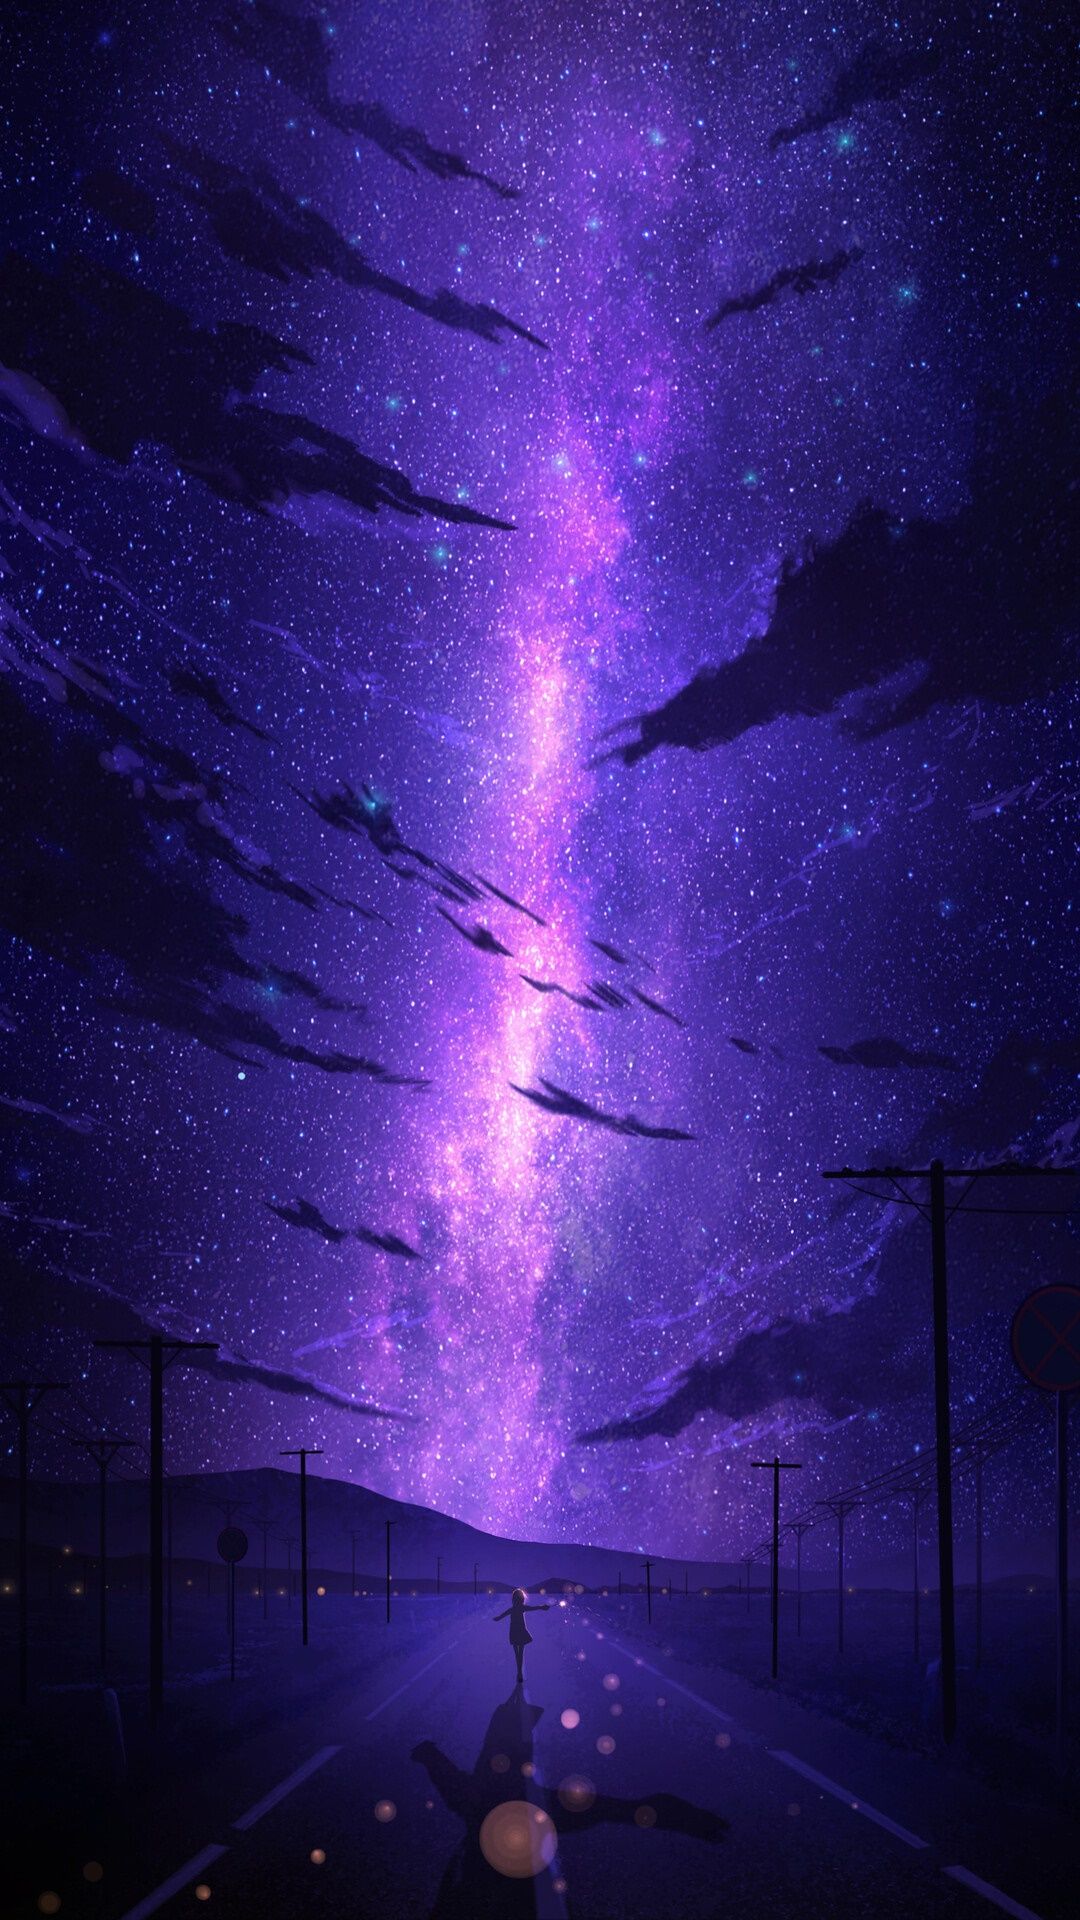 A person walking down the street underneath purple clouds - Night